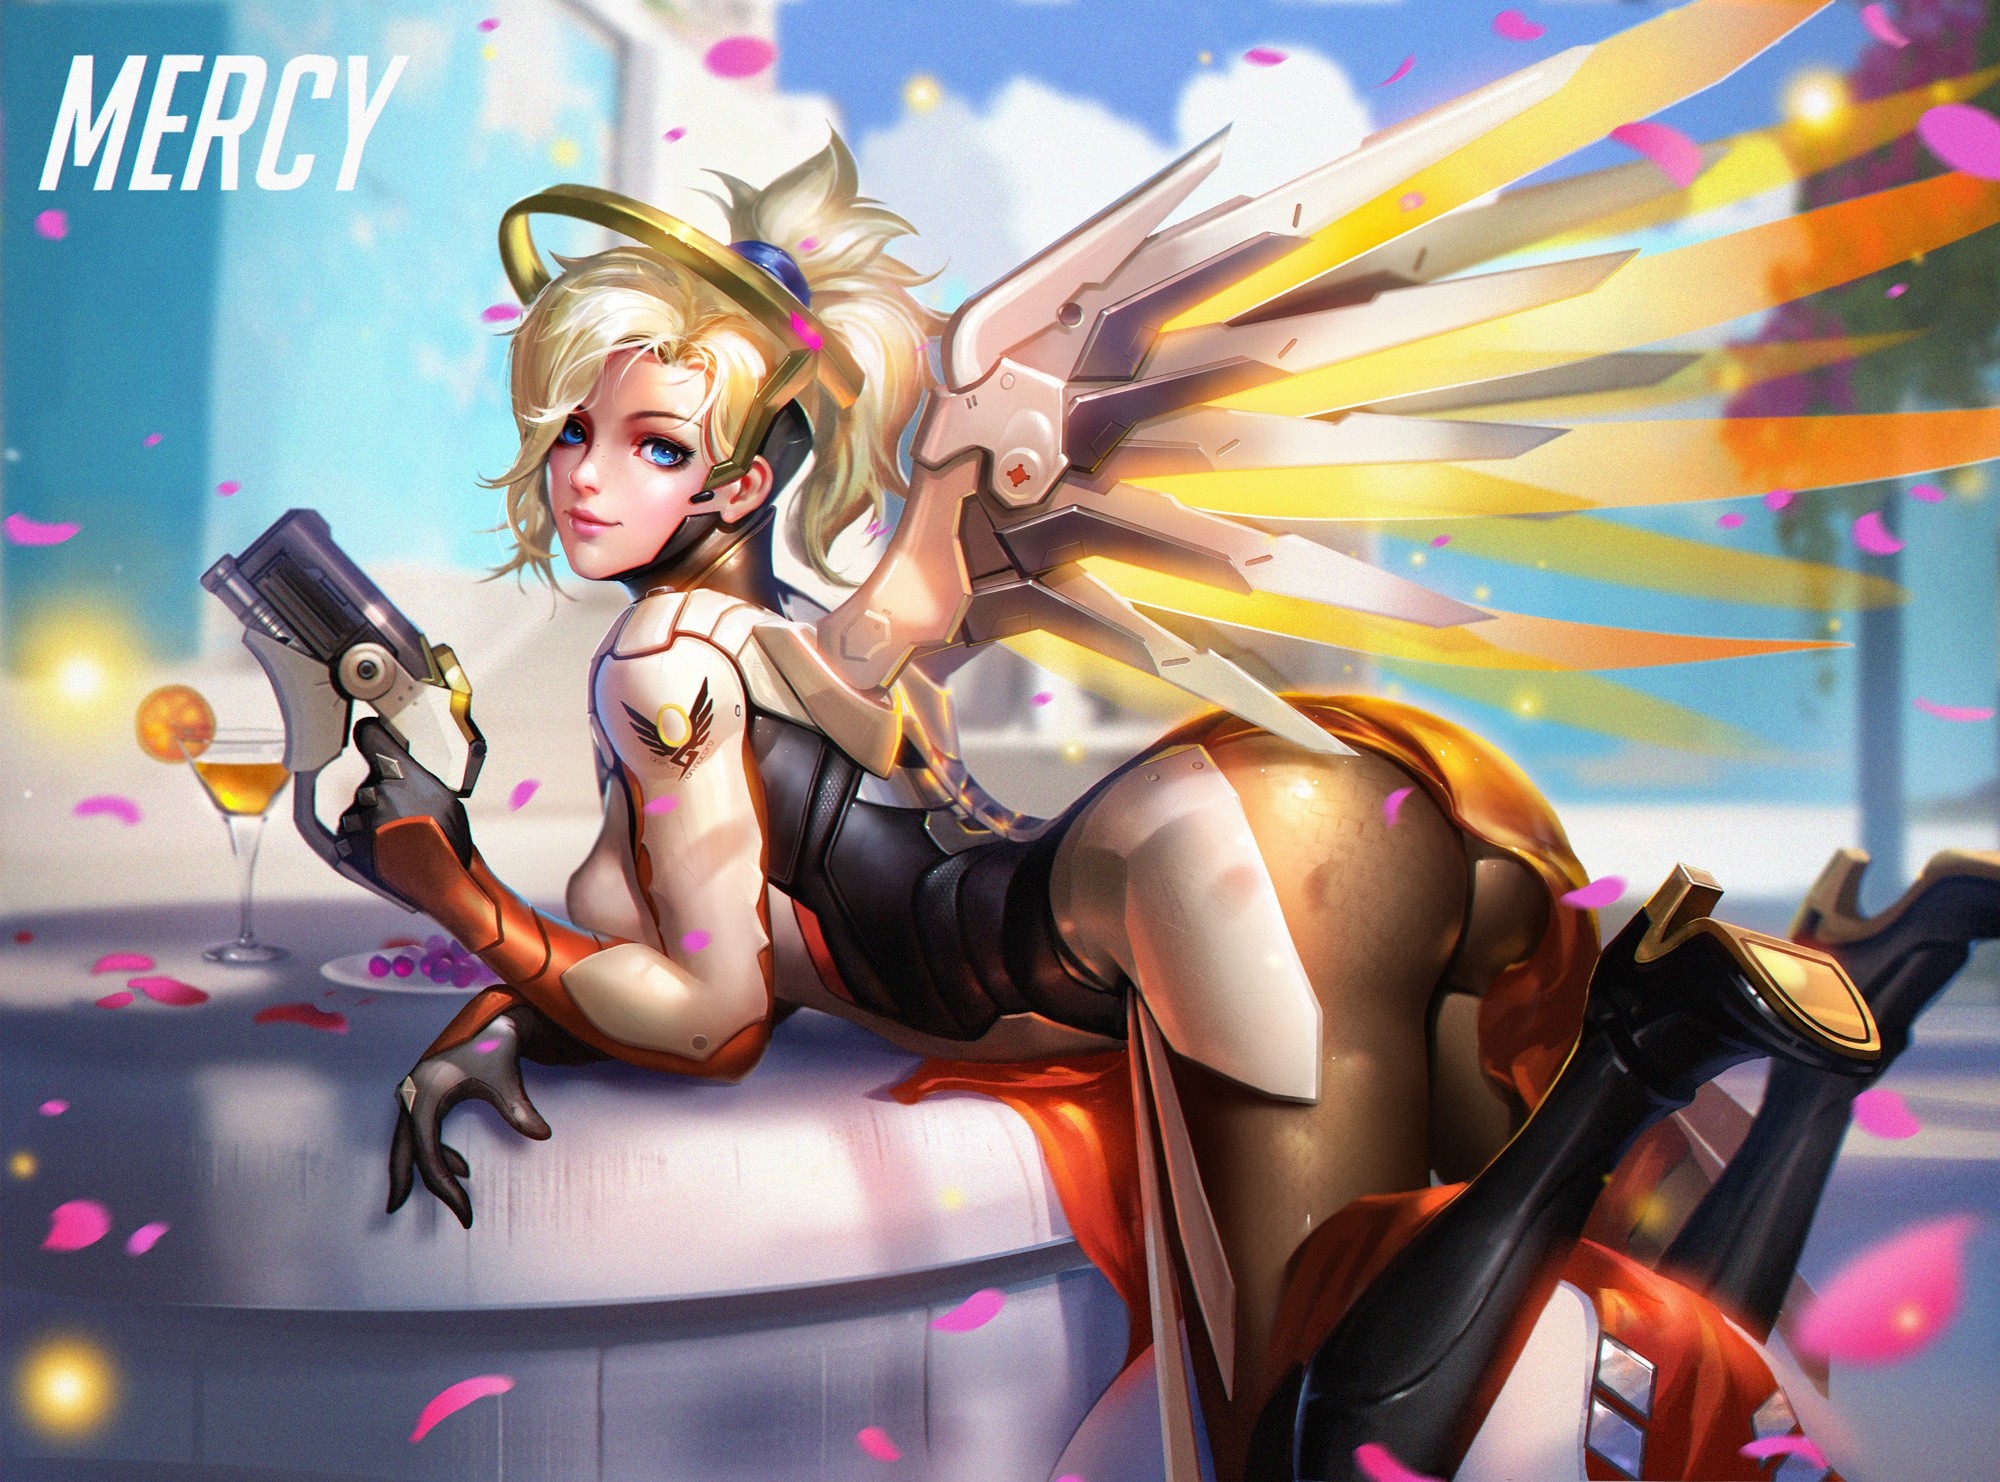 Mercy Overwatch Wallpaper ·① Download Free Cool Full Hd Backgrounds For Desktop And Mobile 